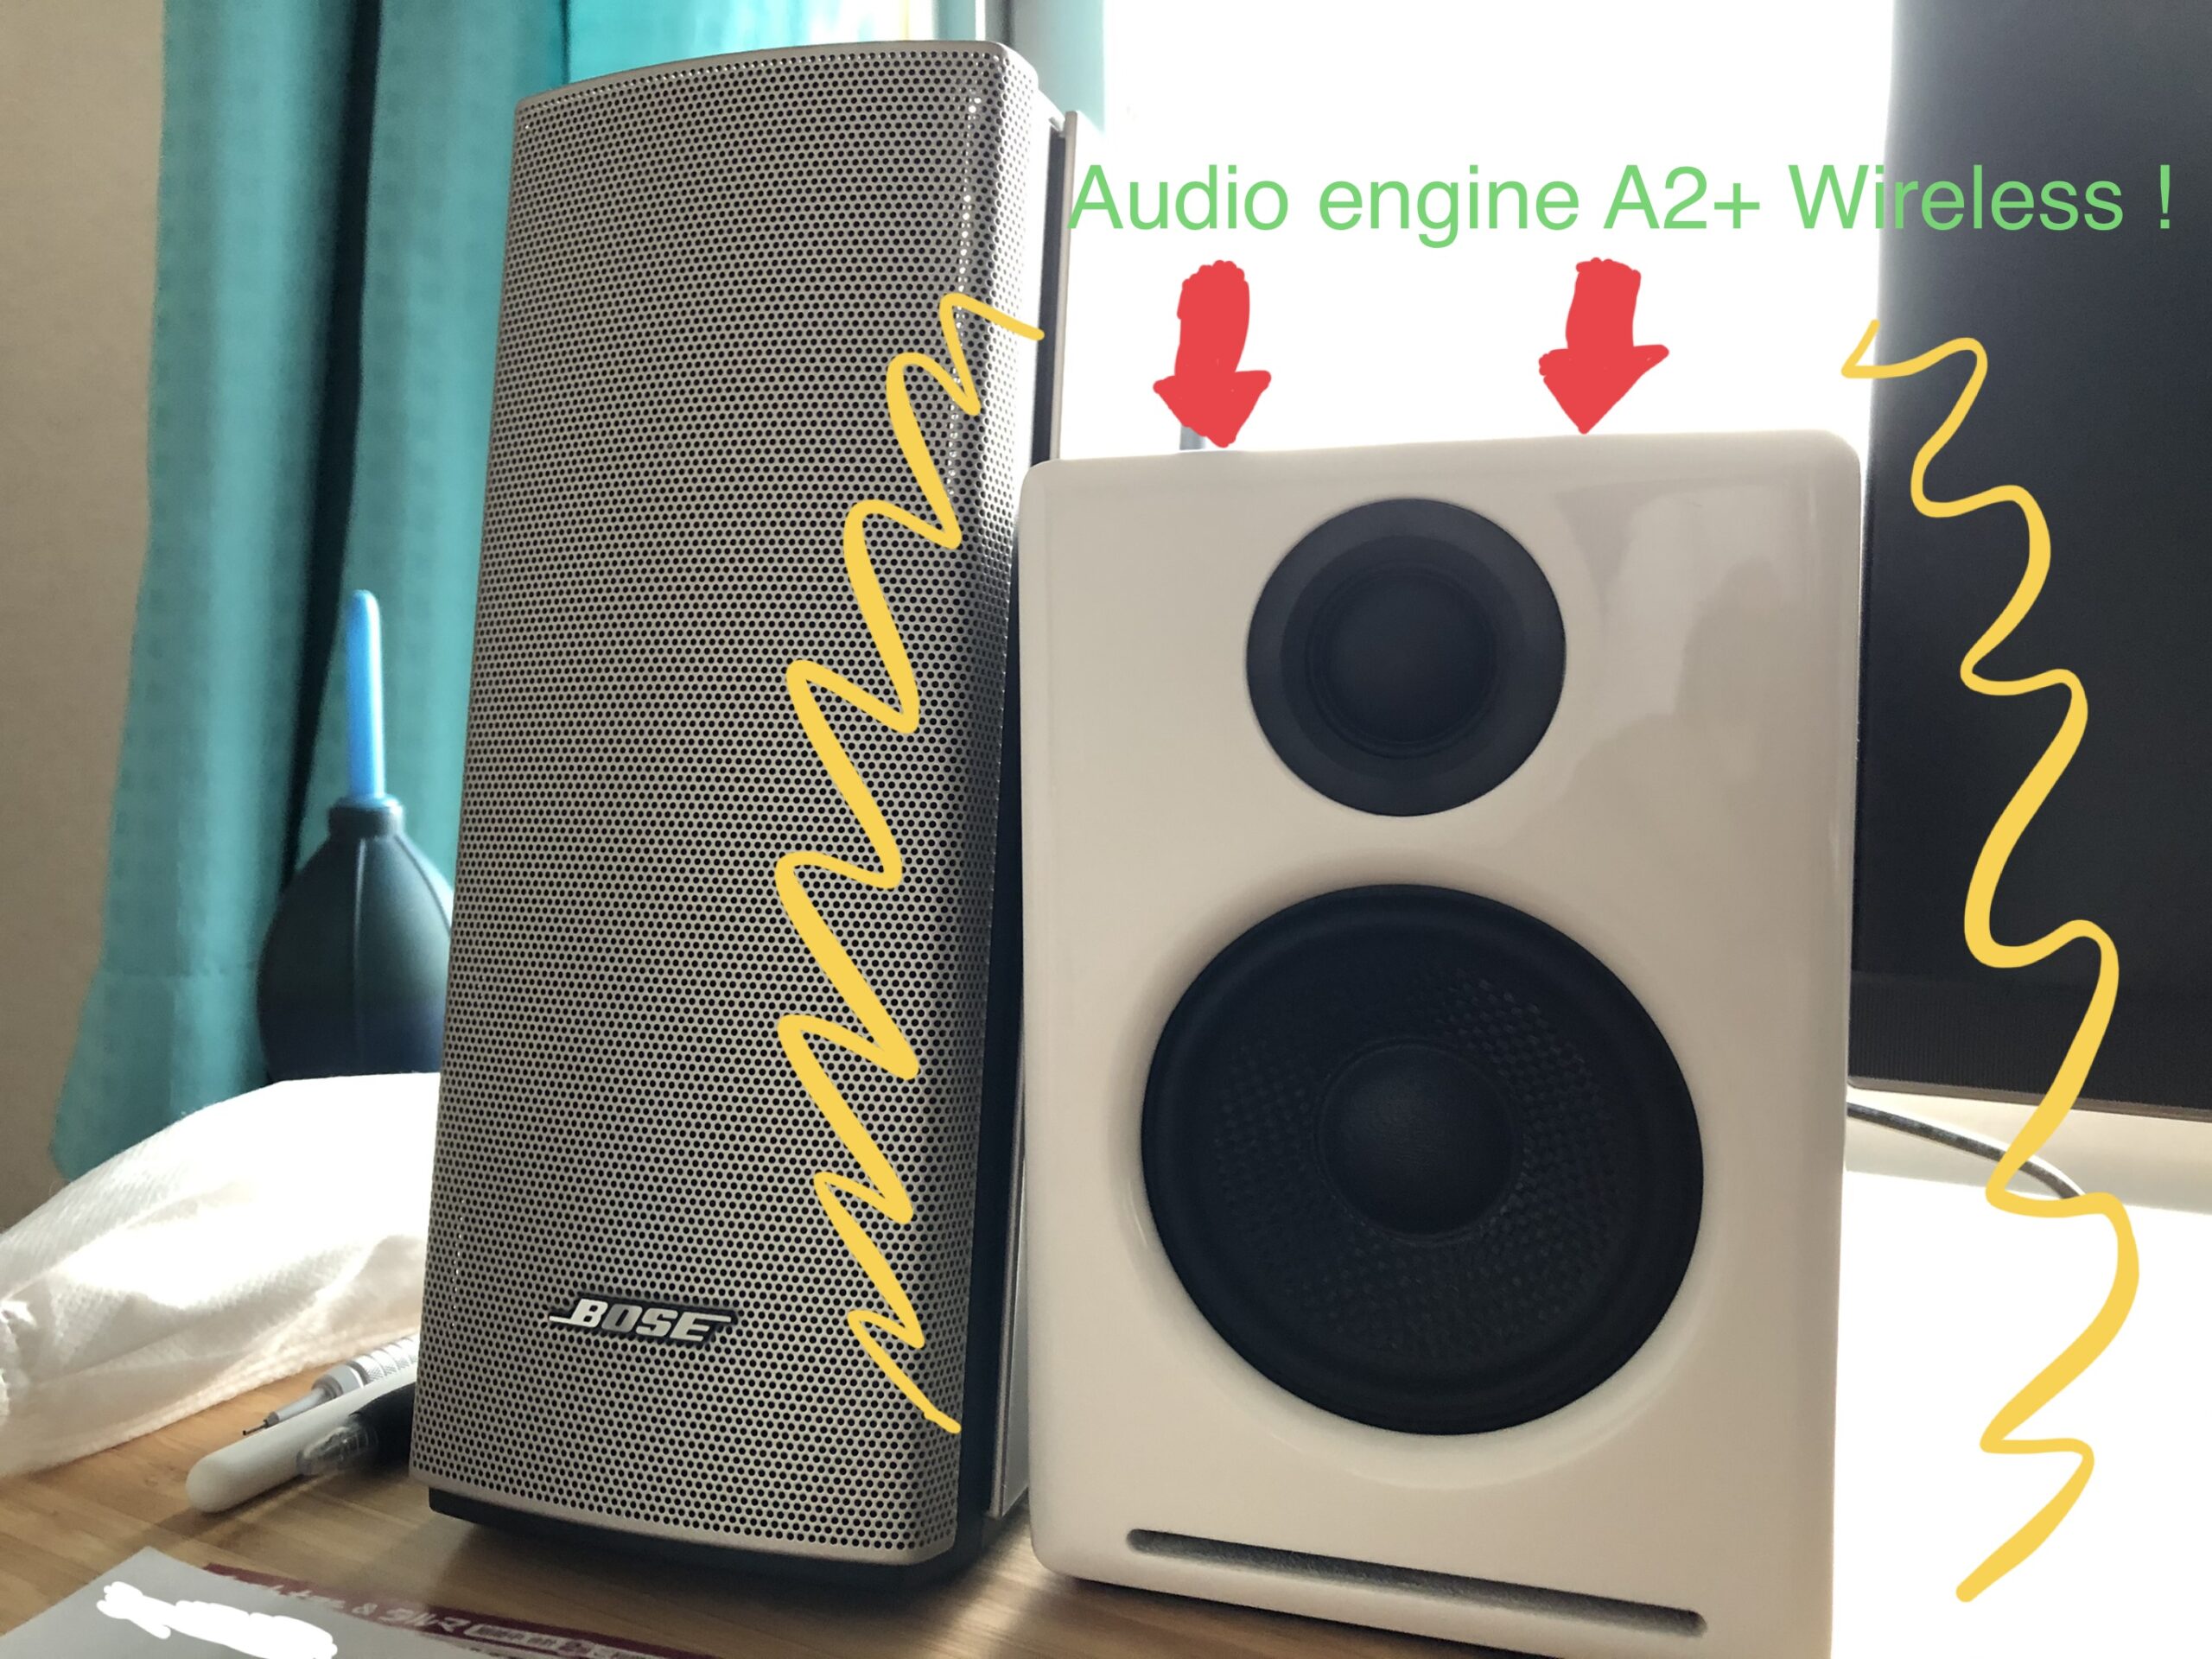 You are currently viewing 【購入品紹介】買って使ってみたらすごくよかった｜ Audioengine A2+ WIRELESS